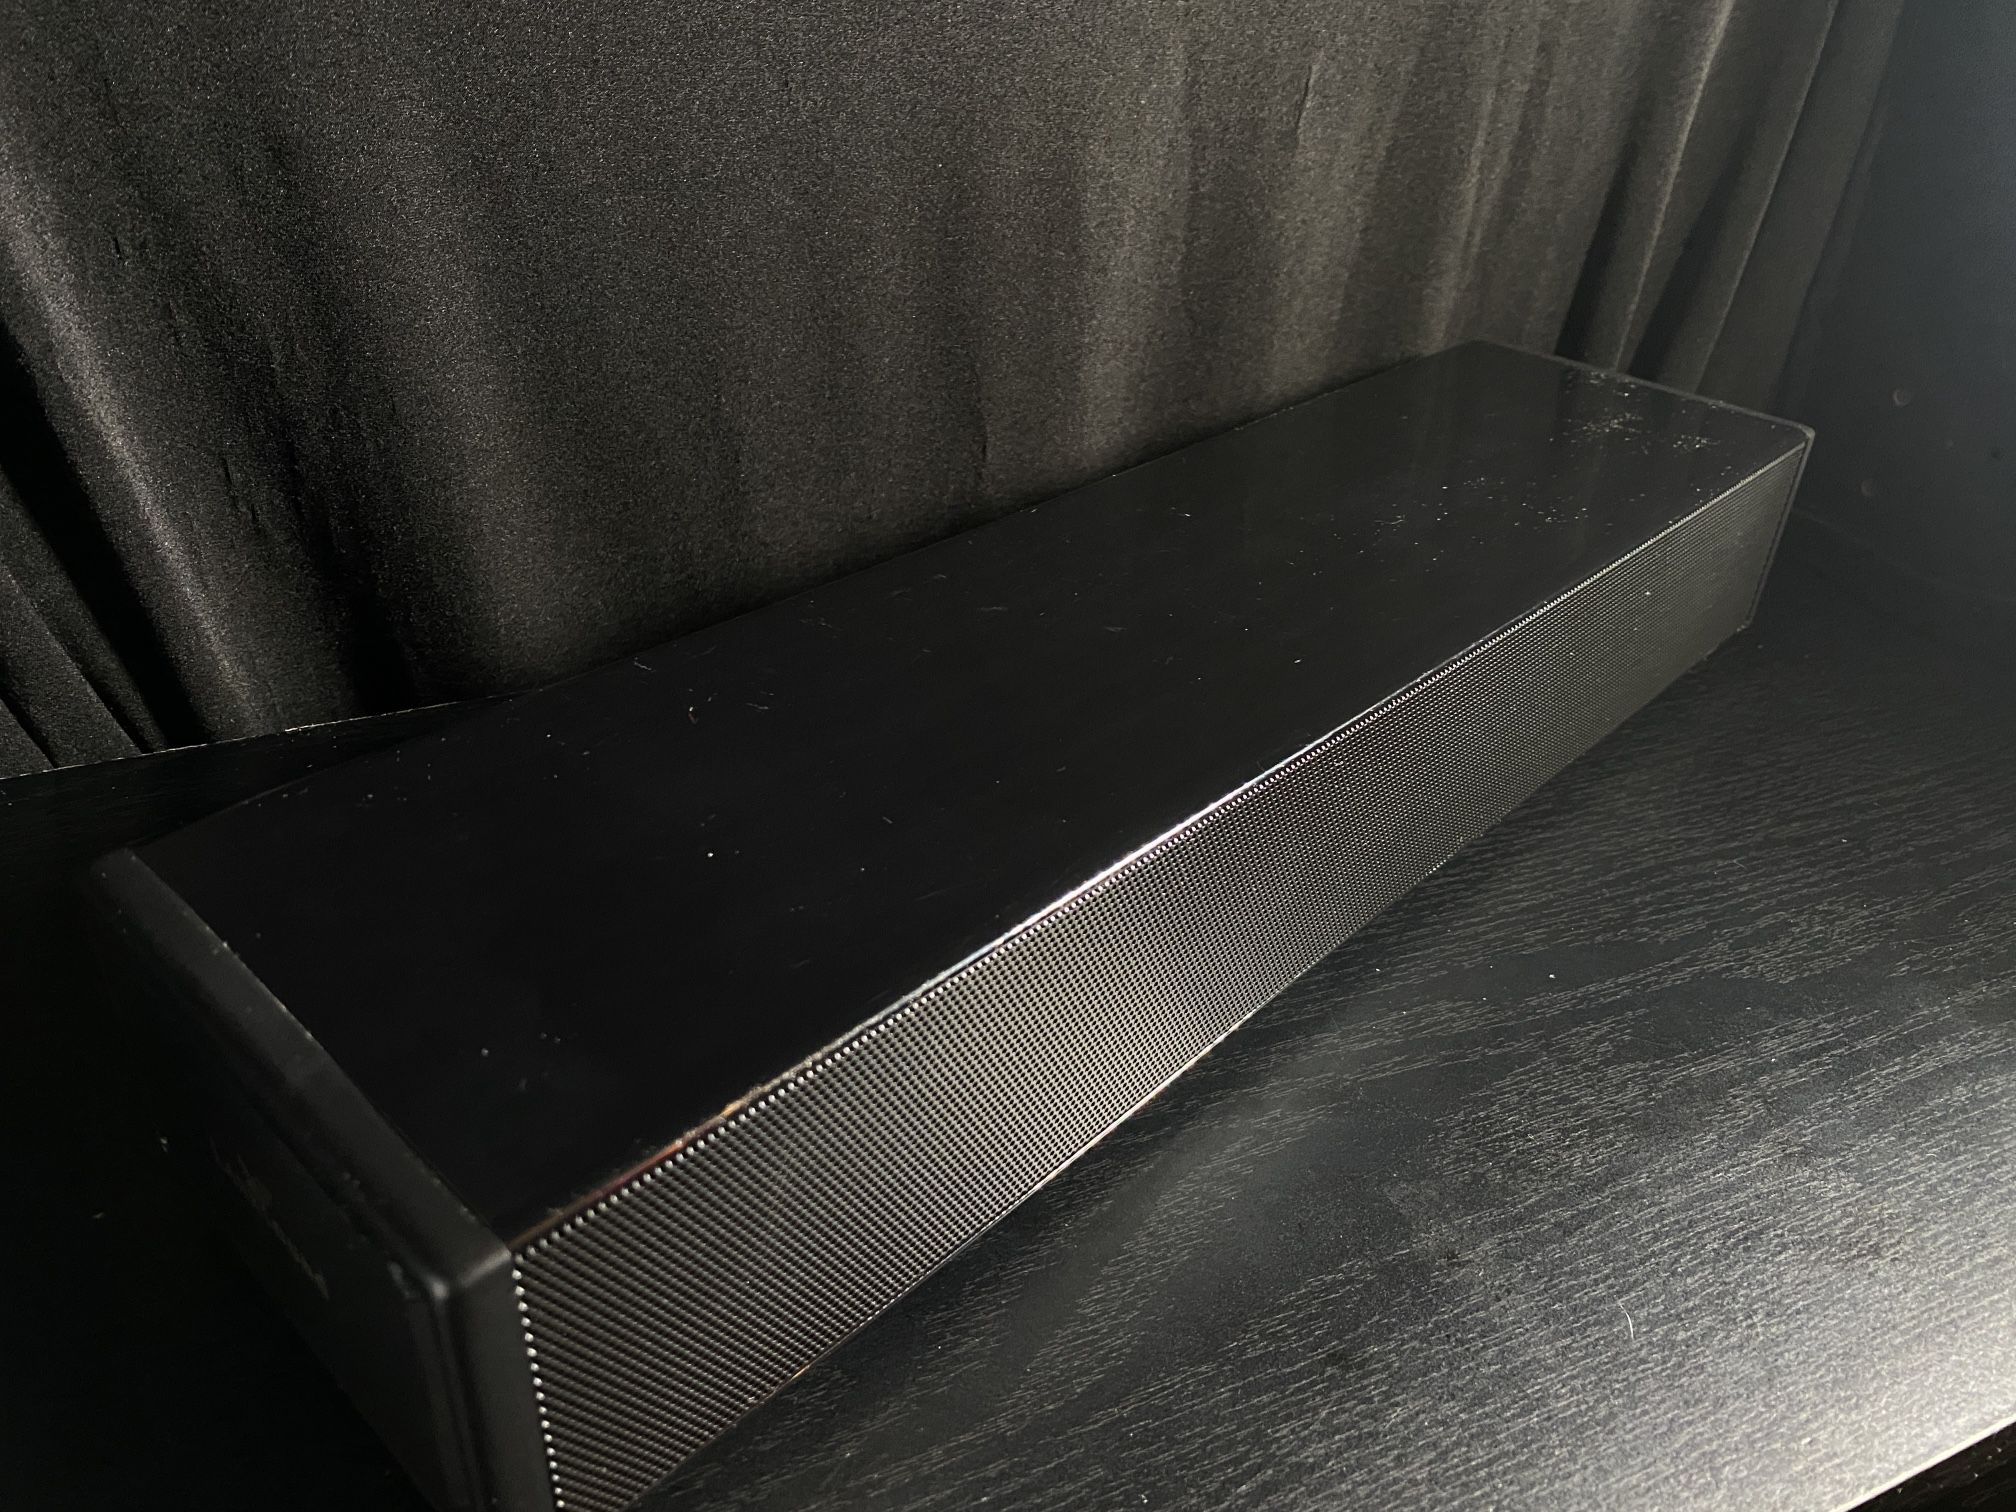 2.1 CH Soundbar with Built-in Subwoofer, 31 Inch Sound Bar for TV with Bluetooth/HDMI ARC/Optical/AUX/USB Connections